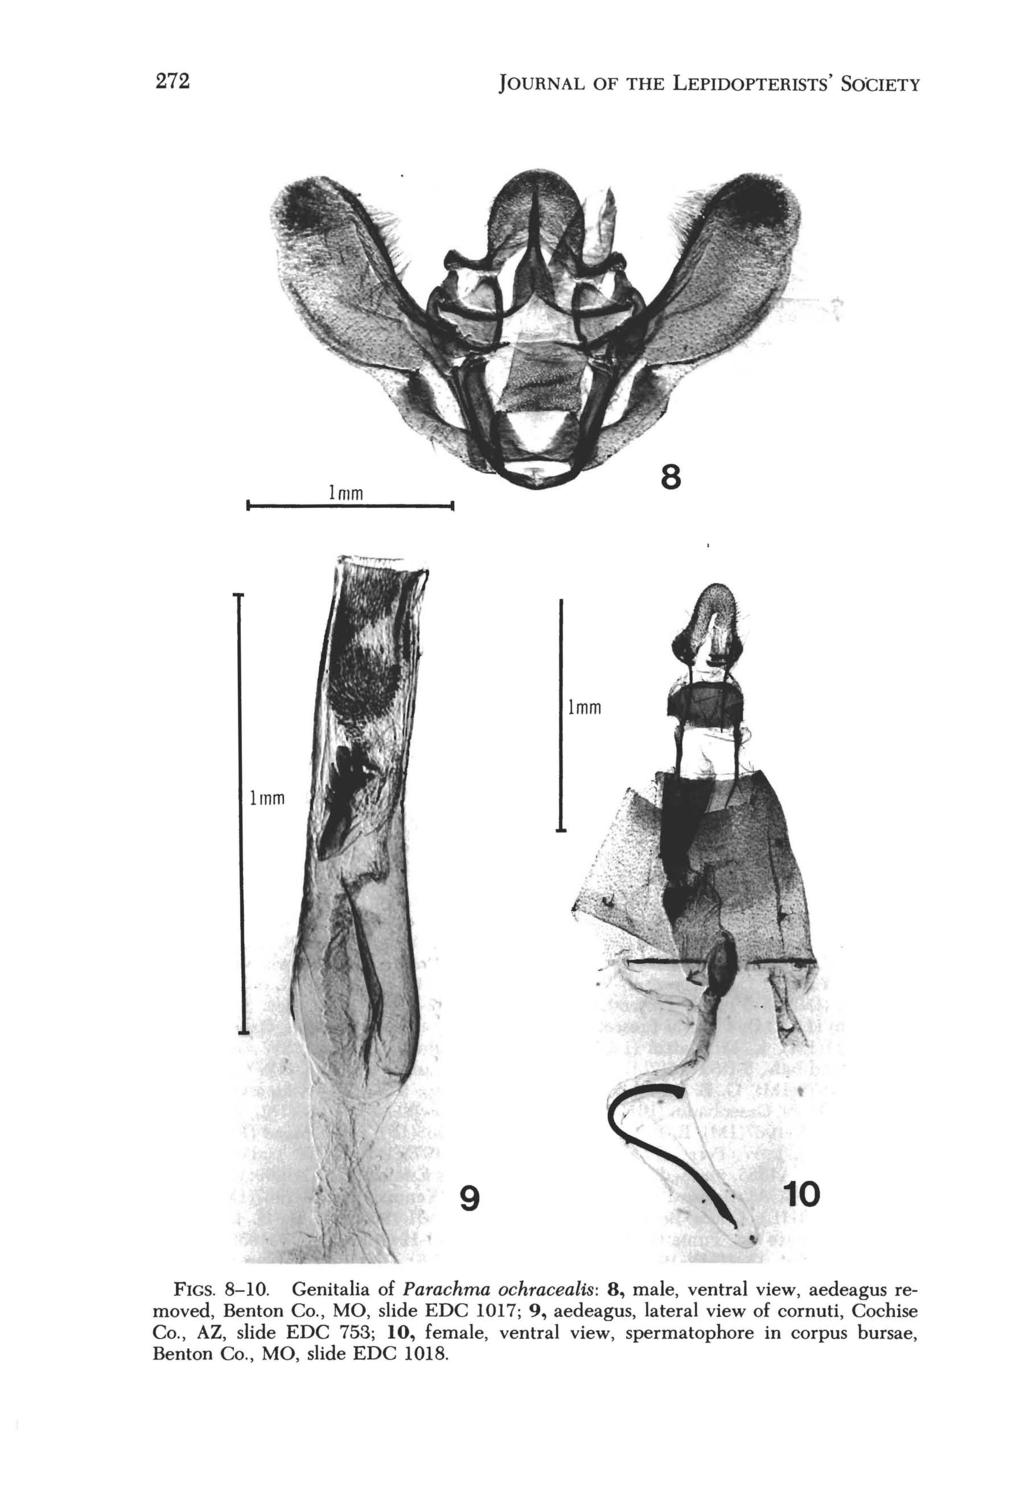 272 JOURNAL OF THE LEPIDOPTERISTS' SOCIETY 9 FIGS. 8-10. Genitalia of Parachma ochracealis: 8, male, ventral view, aedeagus removed, Benton Co.